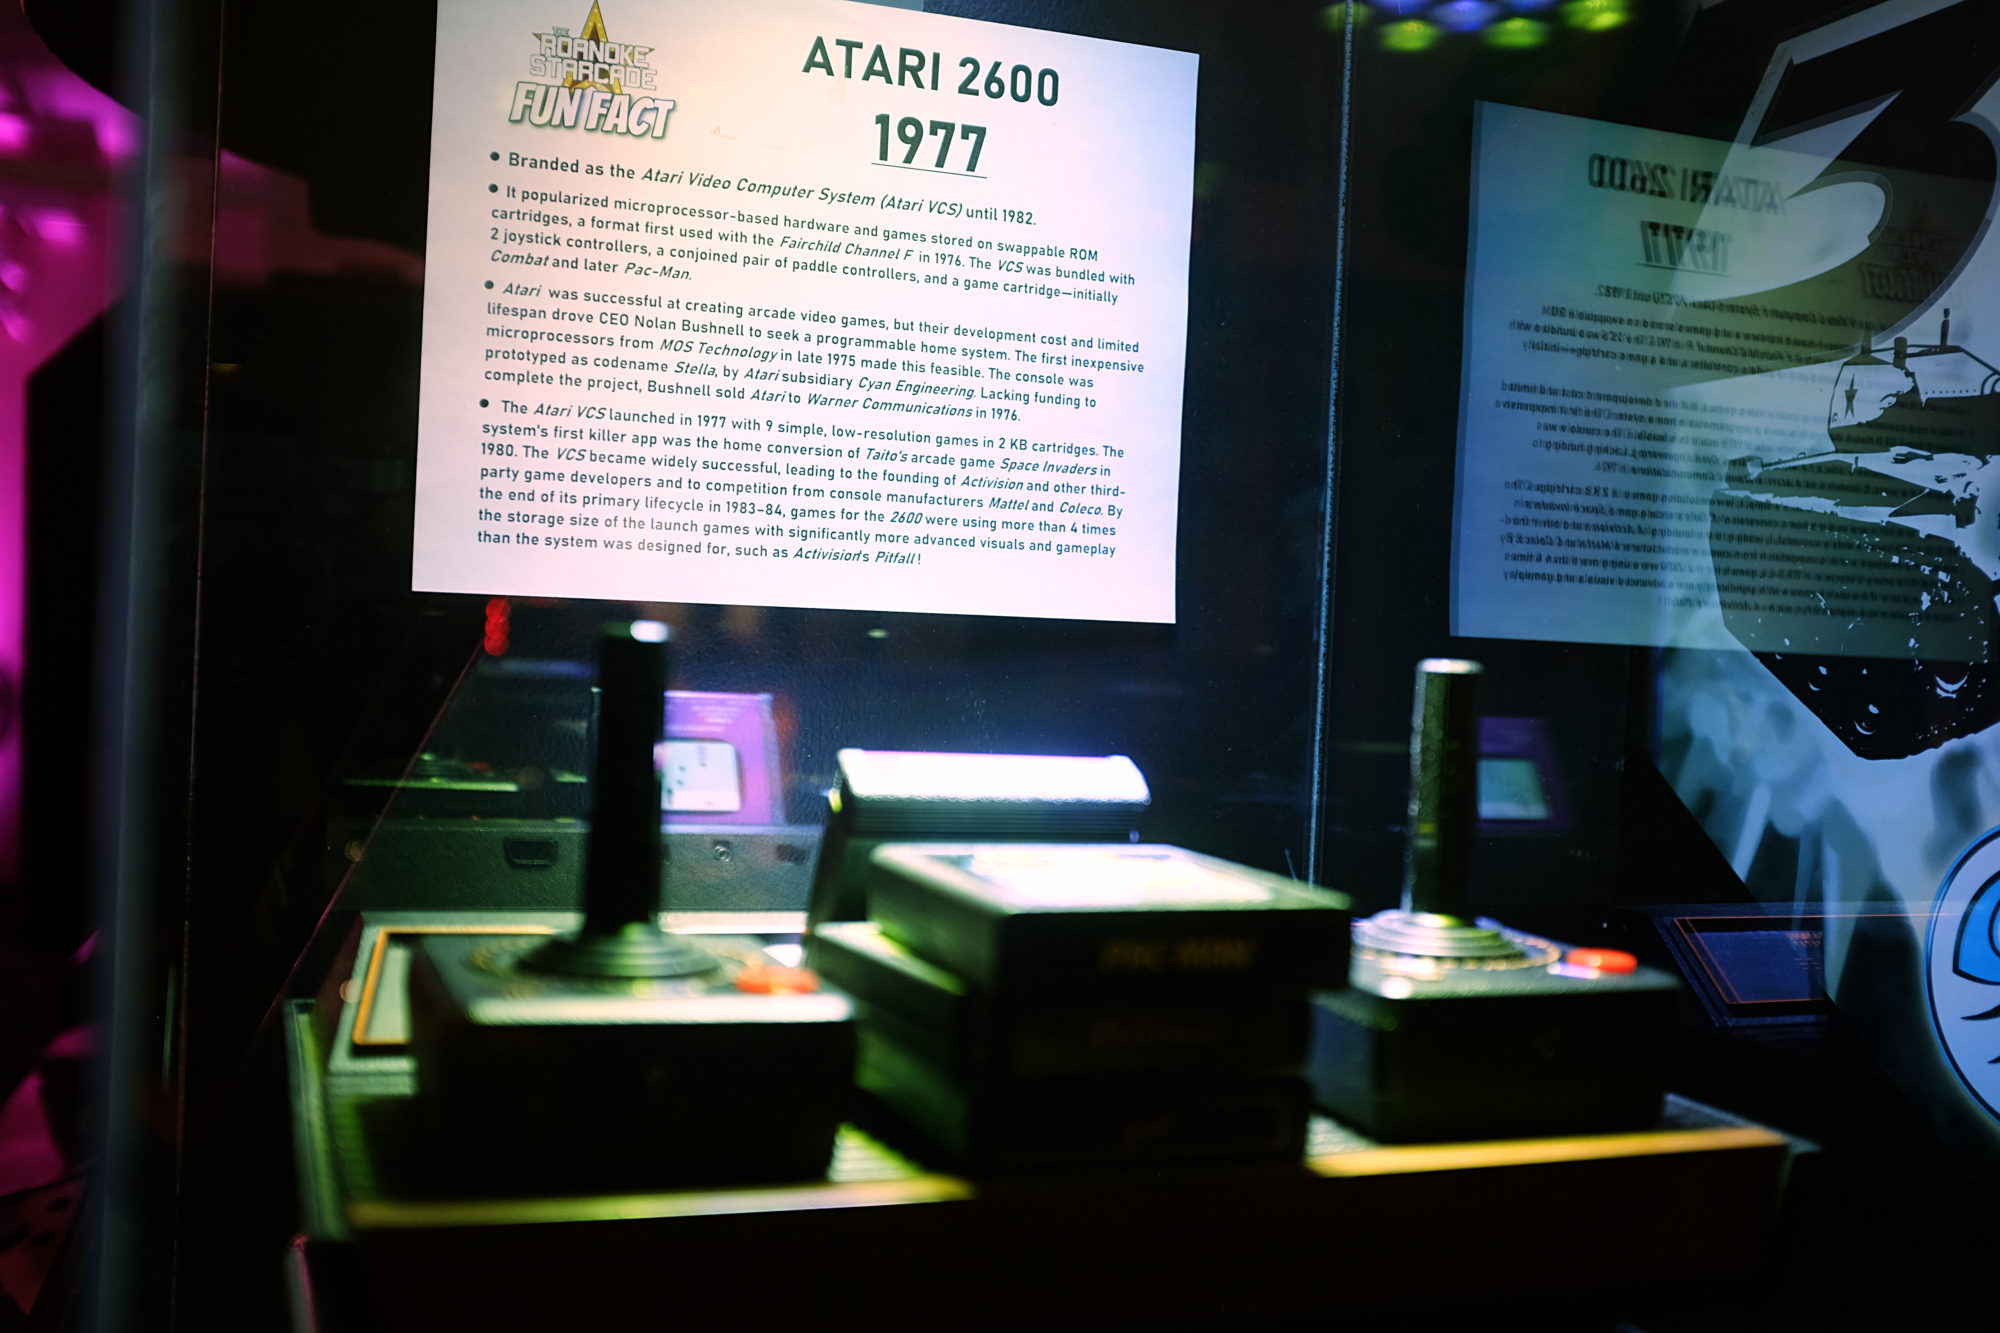 Atari controller and games in a museum case